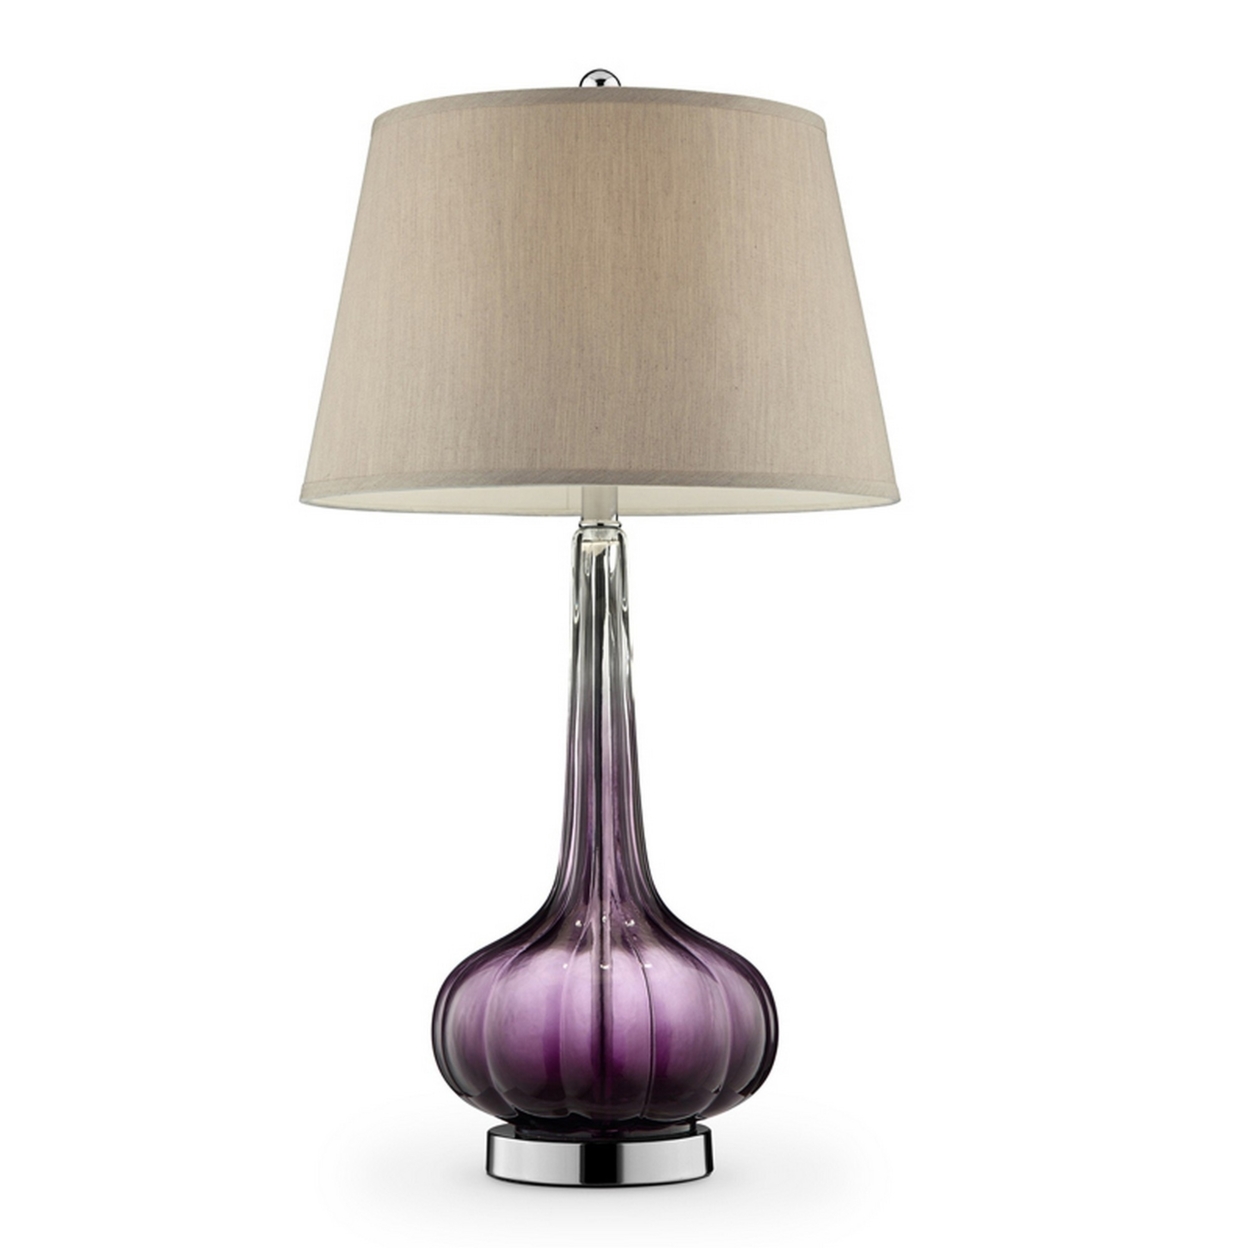 Onion Shaped Body Glass Table Lamp With Tapered Shade, Purple- Saltoro Sherpi